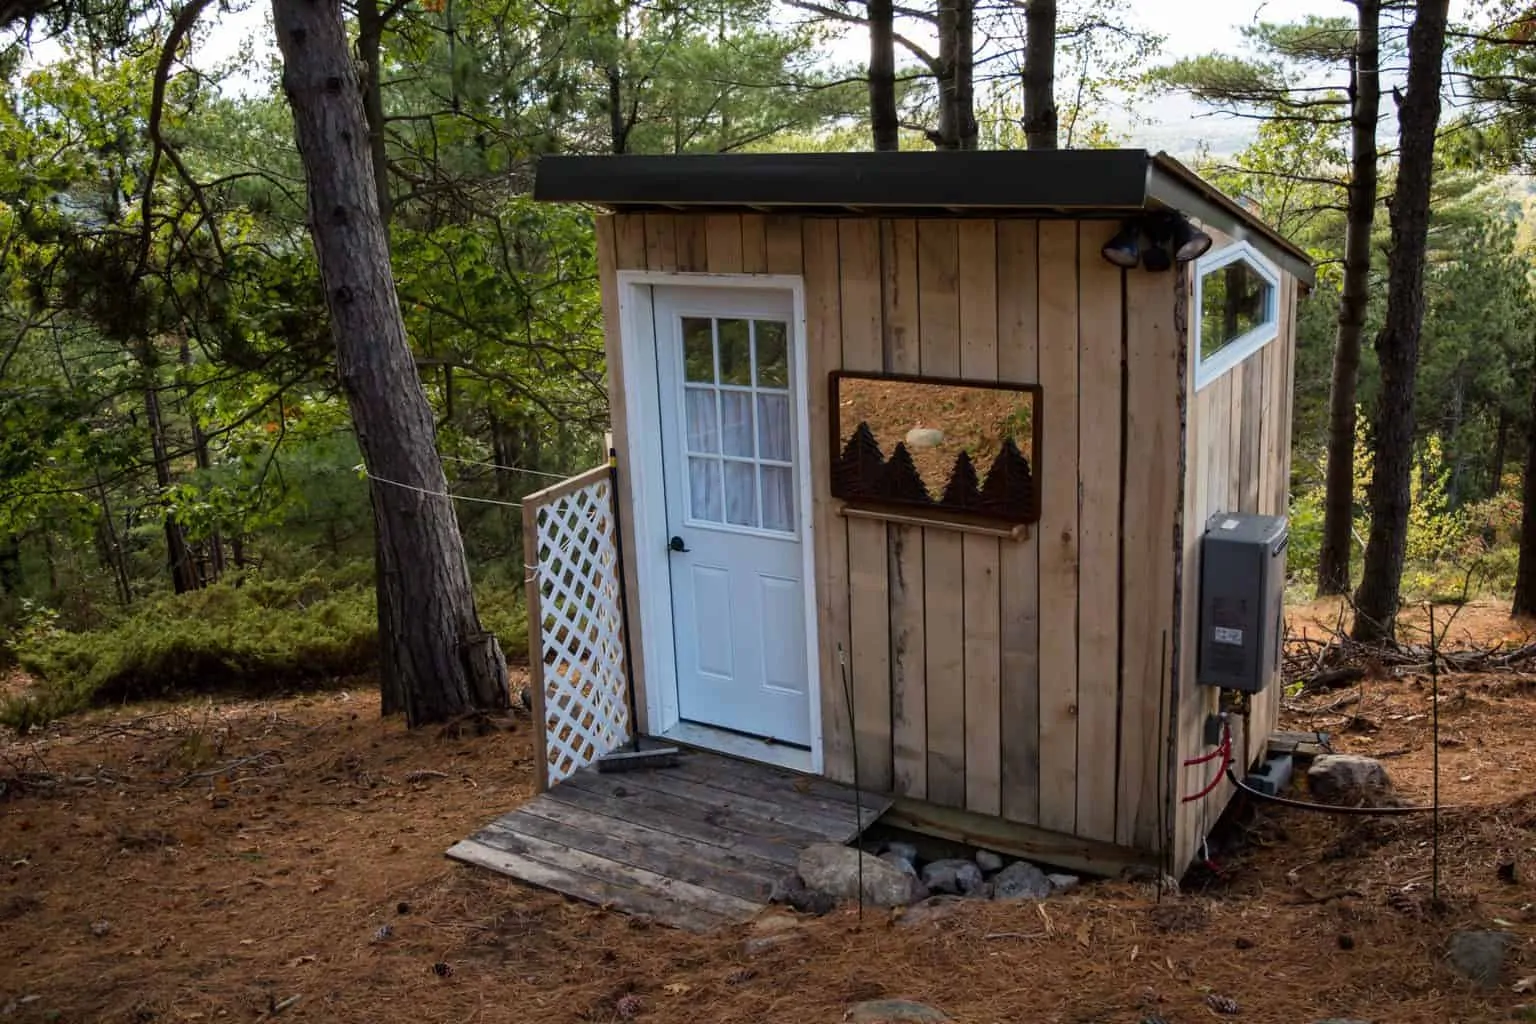 An outdoor shower outside a vacation rental in the Adirondacks of New York.